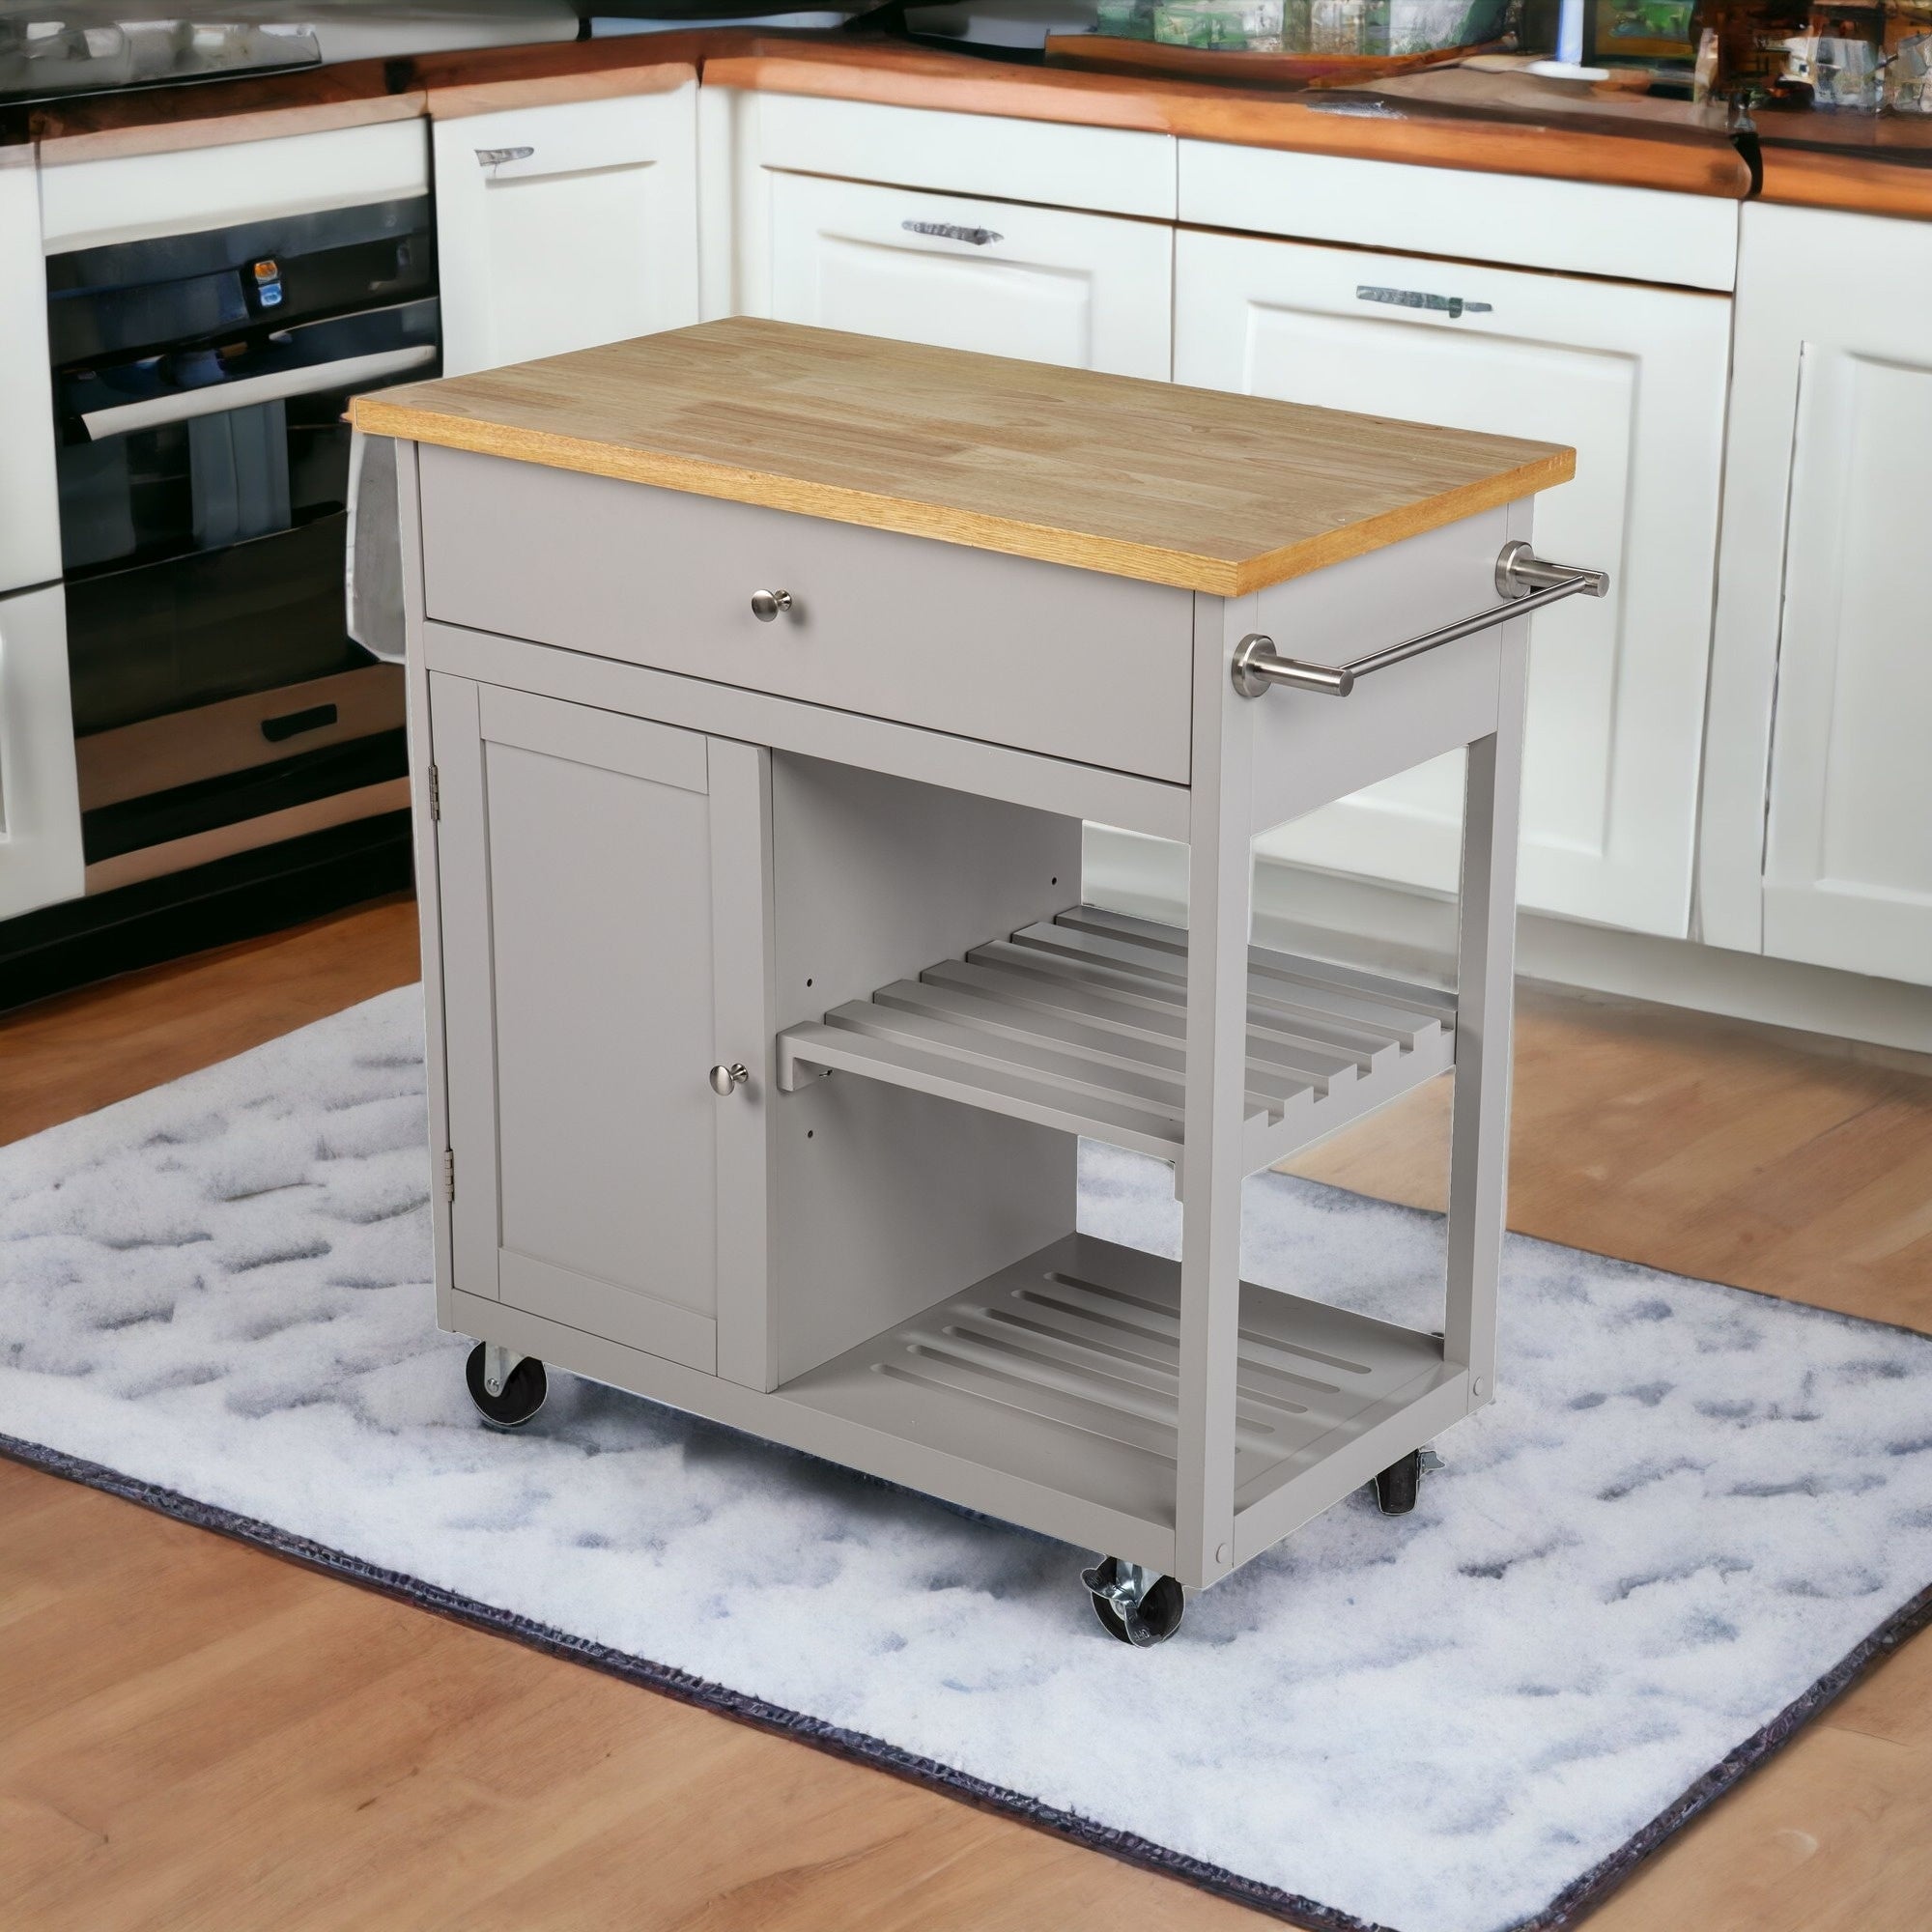 Gray and Natural 35" Rolling Kitchen Island With Storage